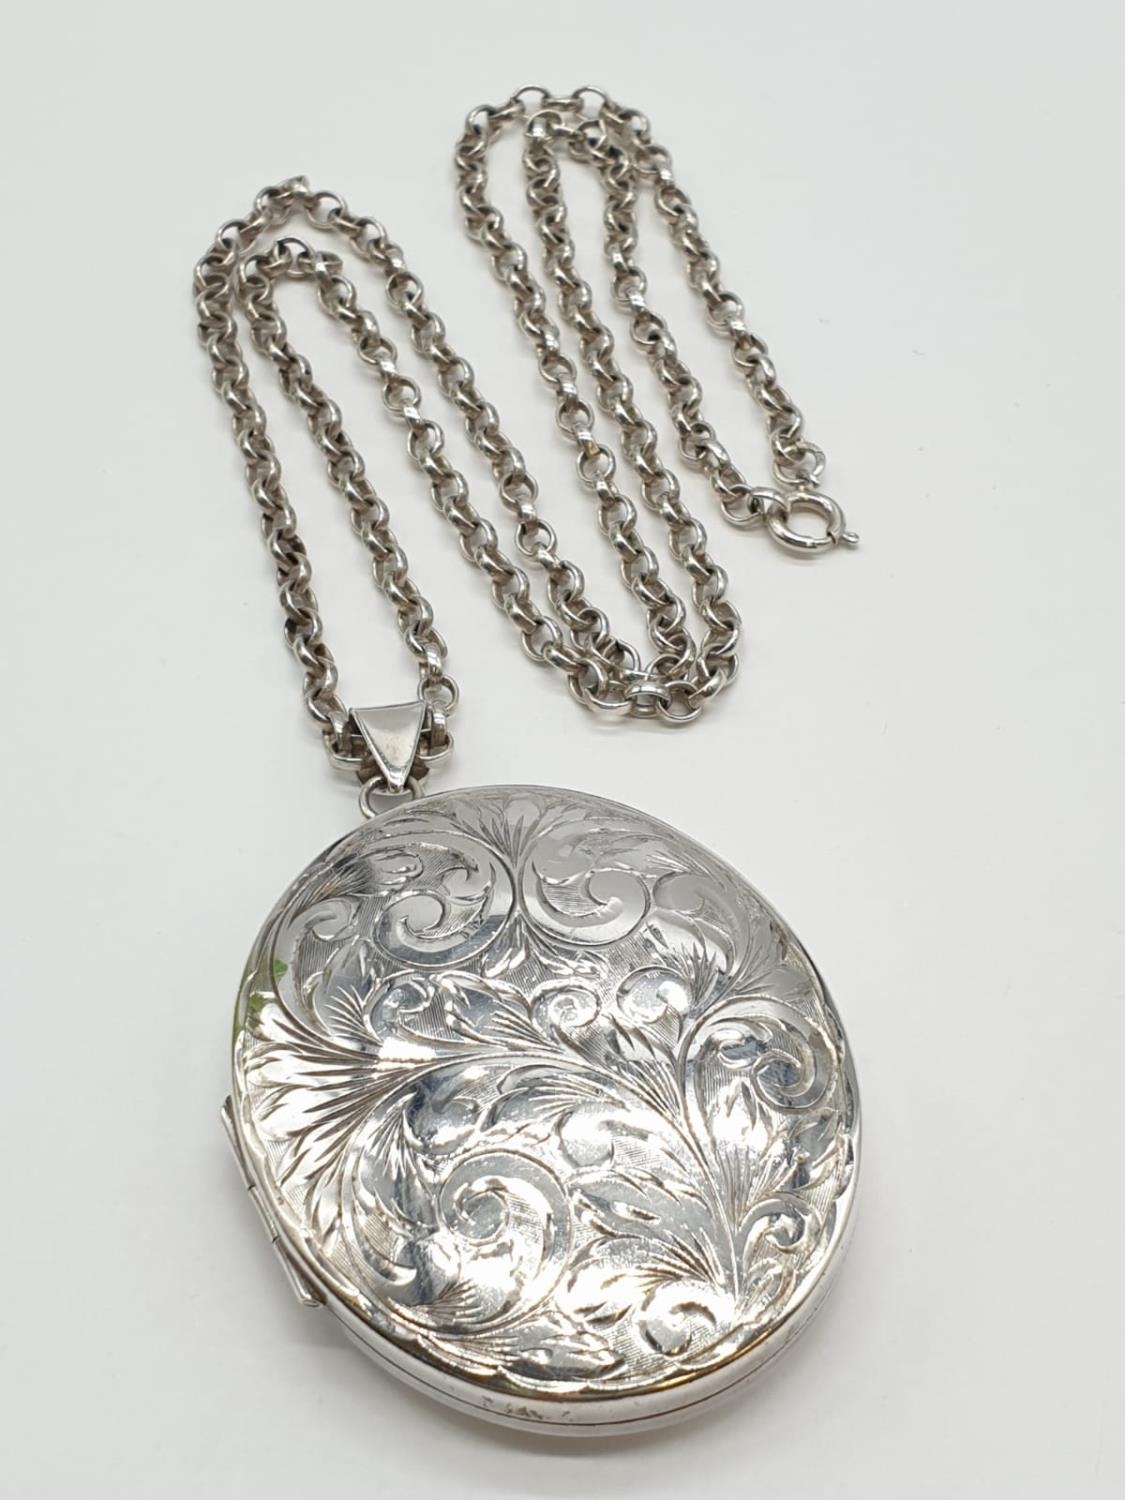 Vintage Large Silver Locket having scroll work to front. Mounted on a long silver belcher type